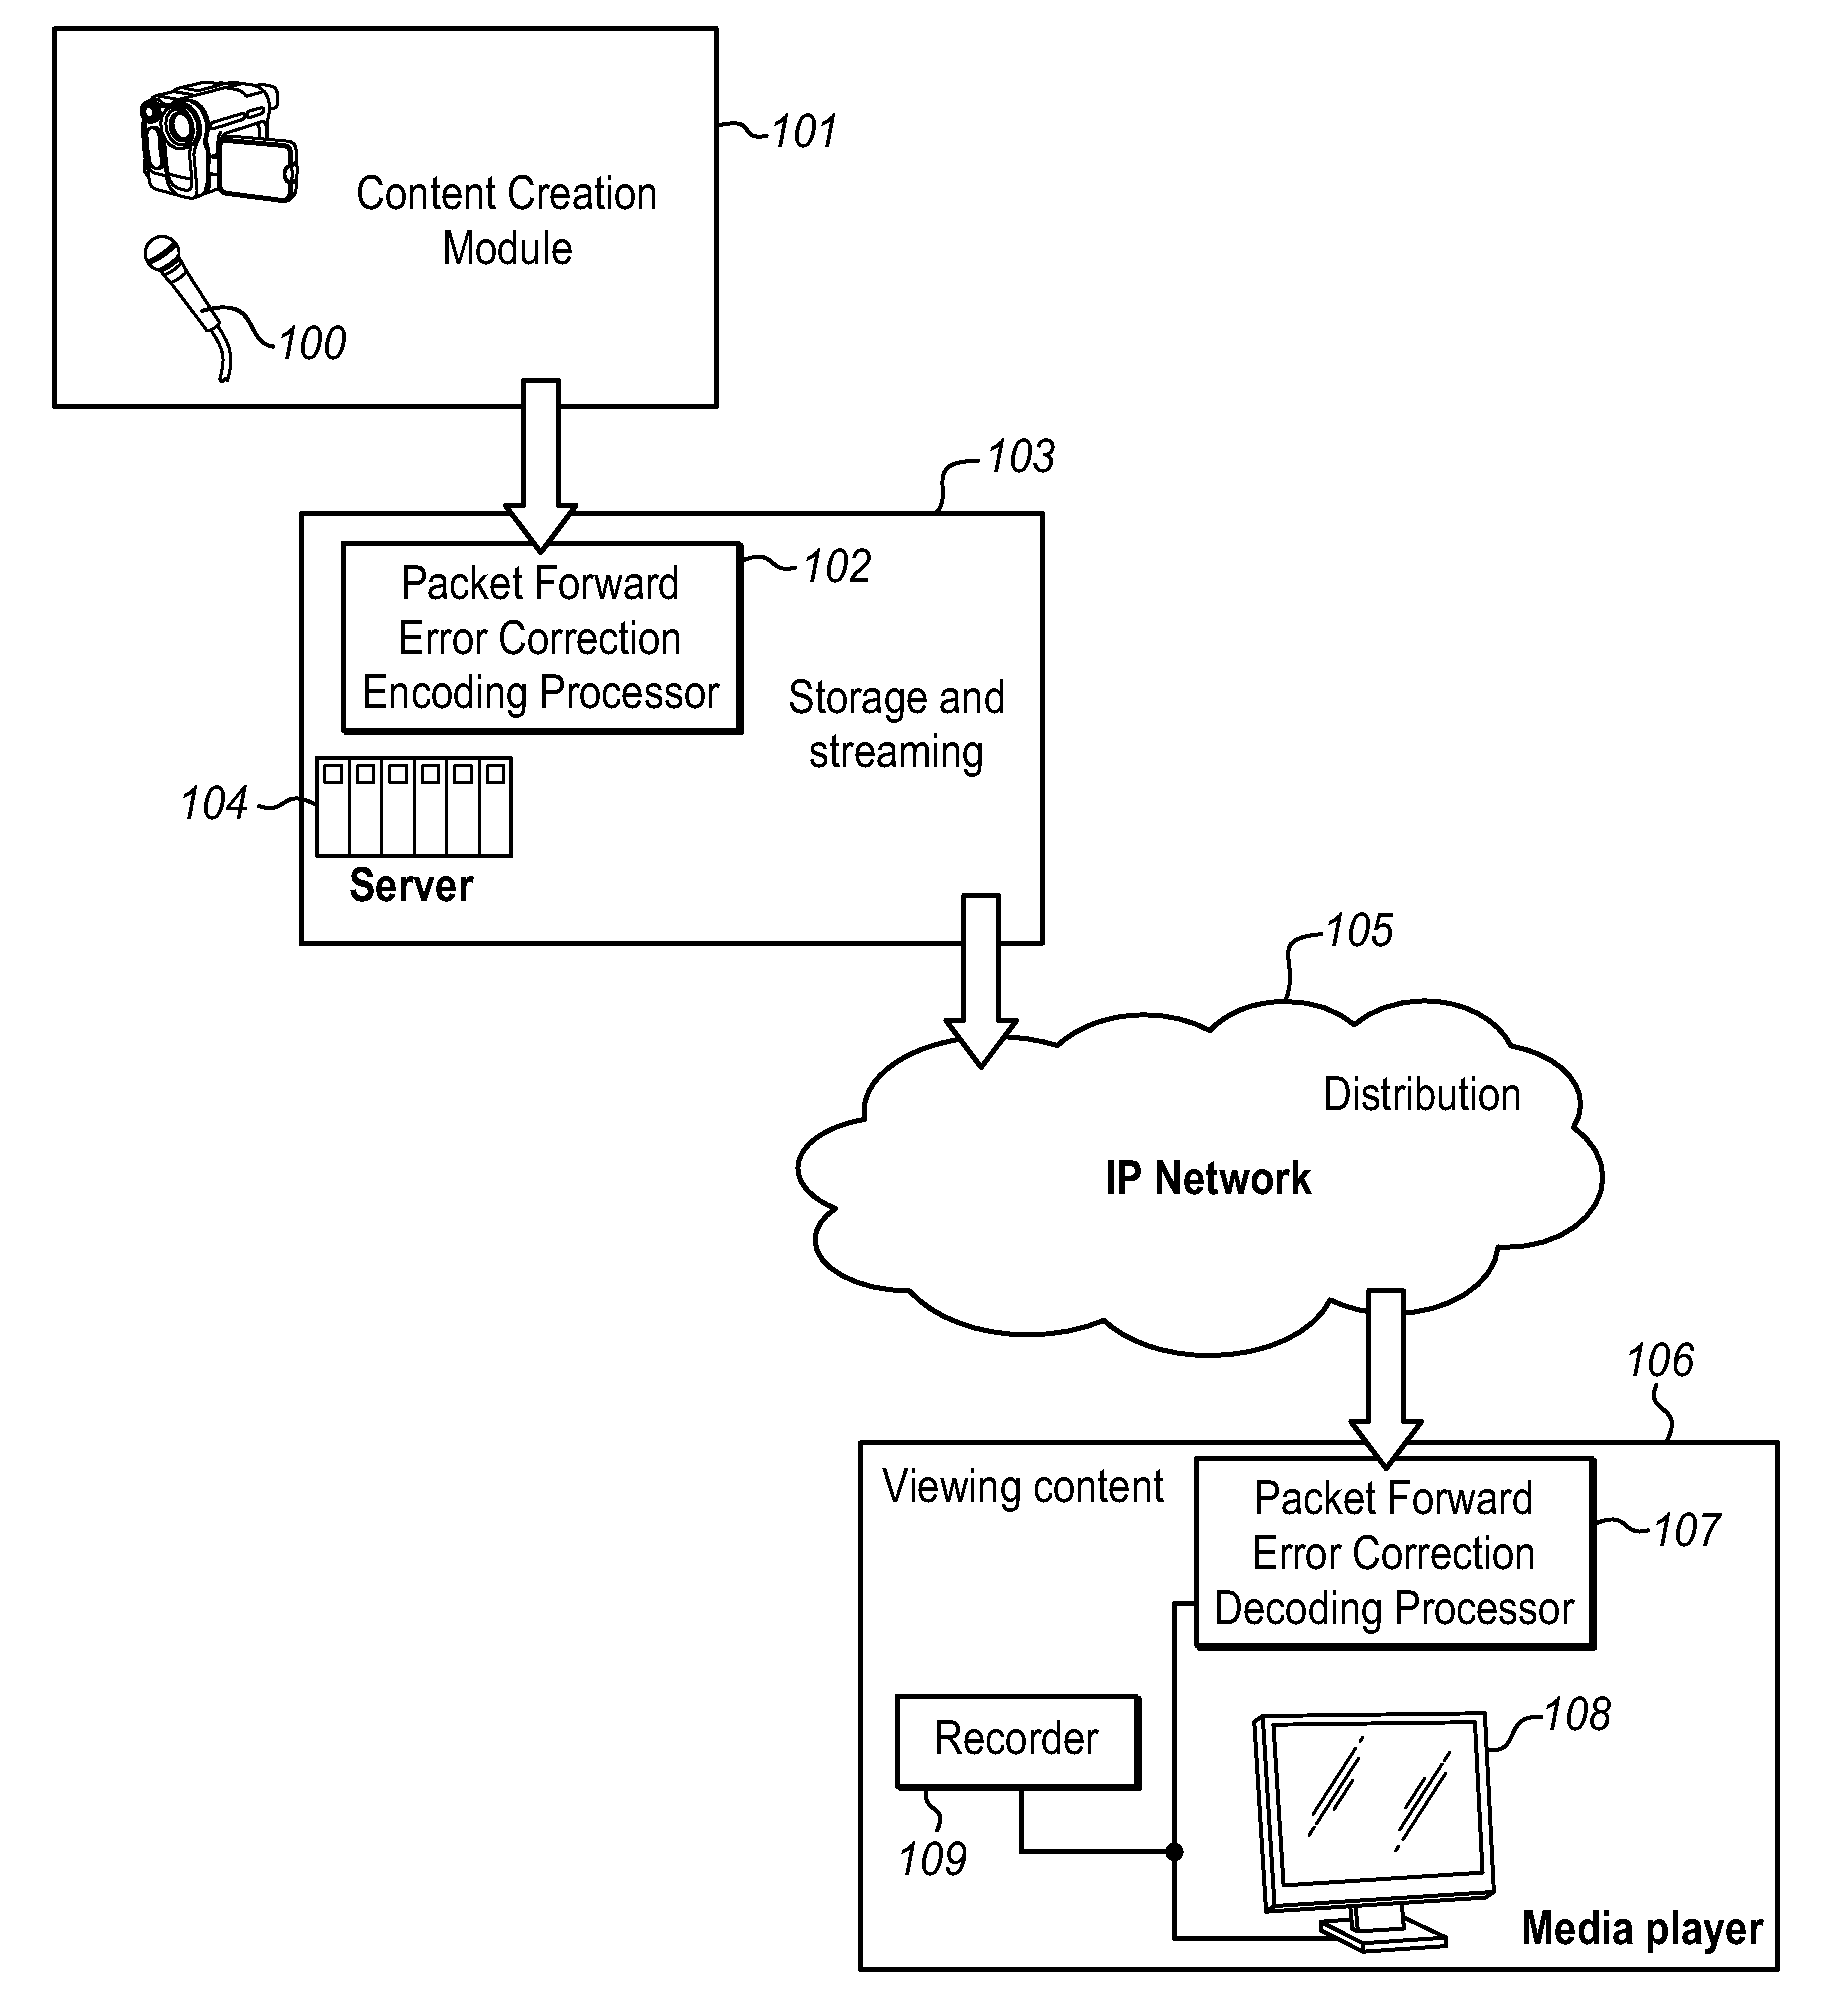 Universal packet loss recovery system for delivery of real-time streaming multimedia content over packet-switched networks